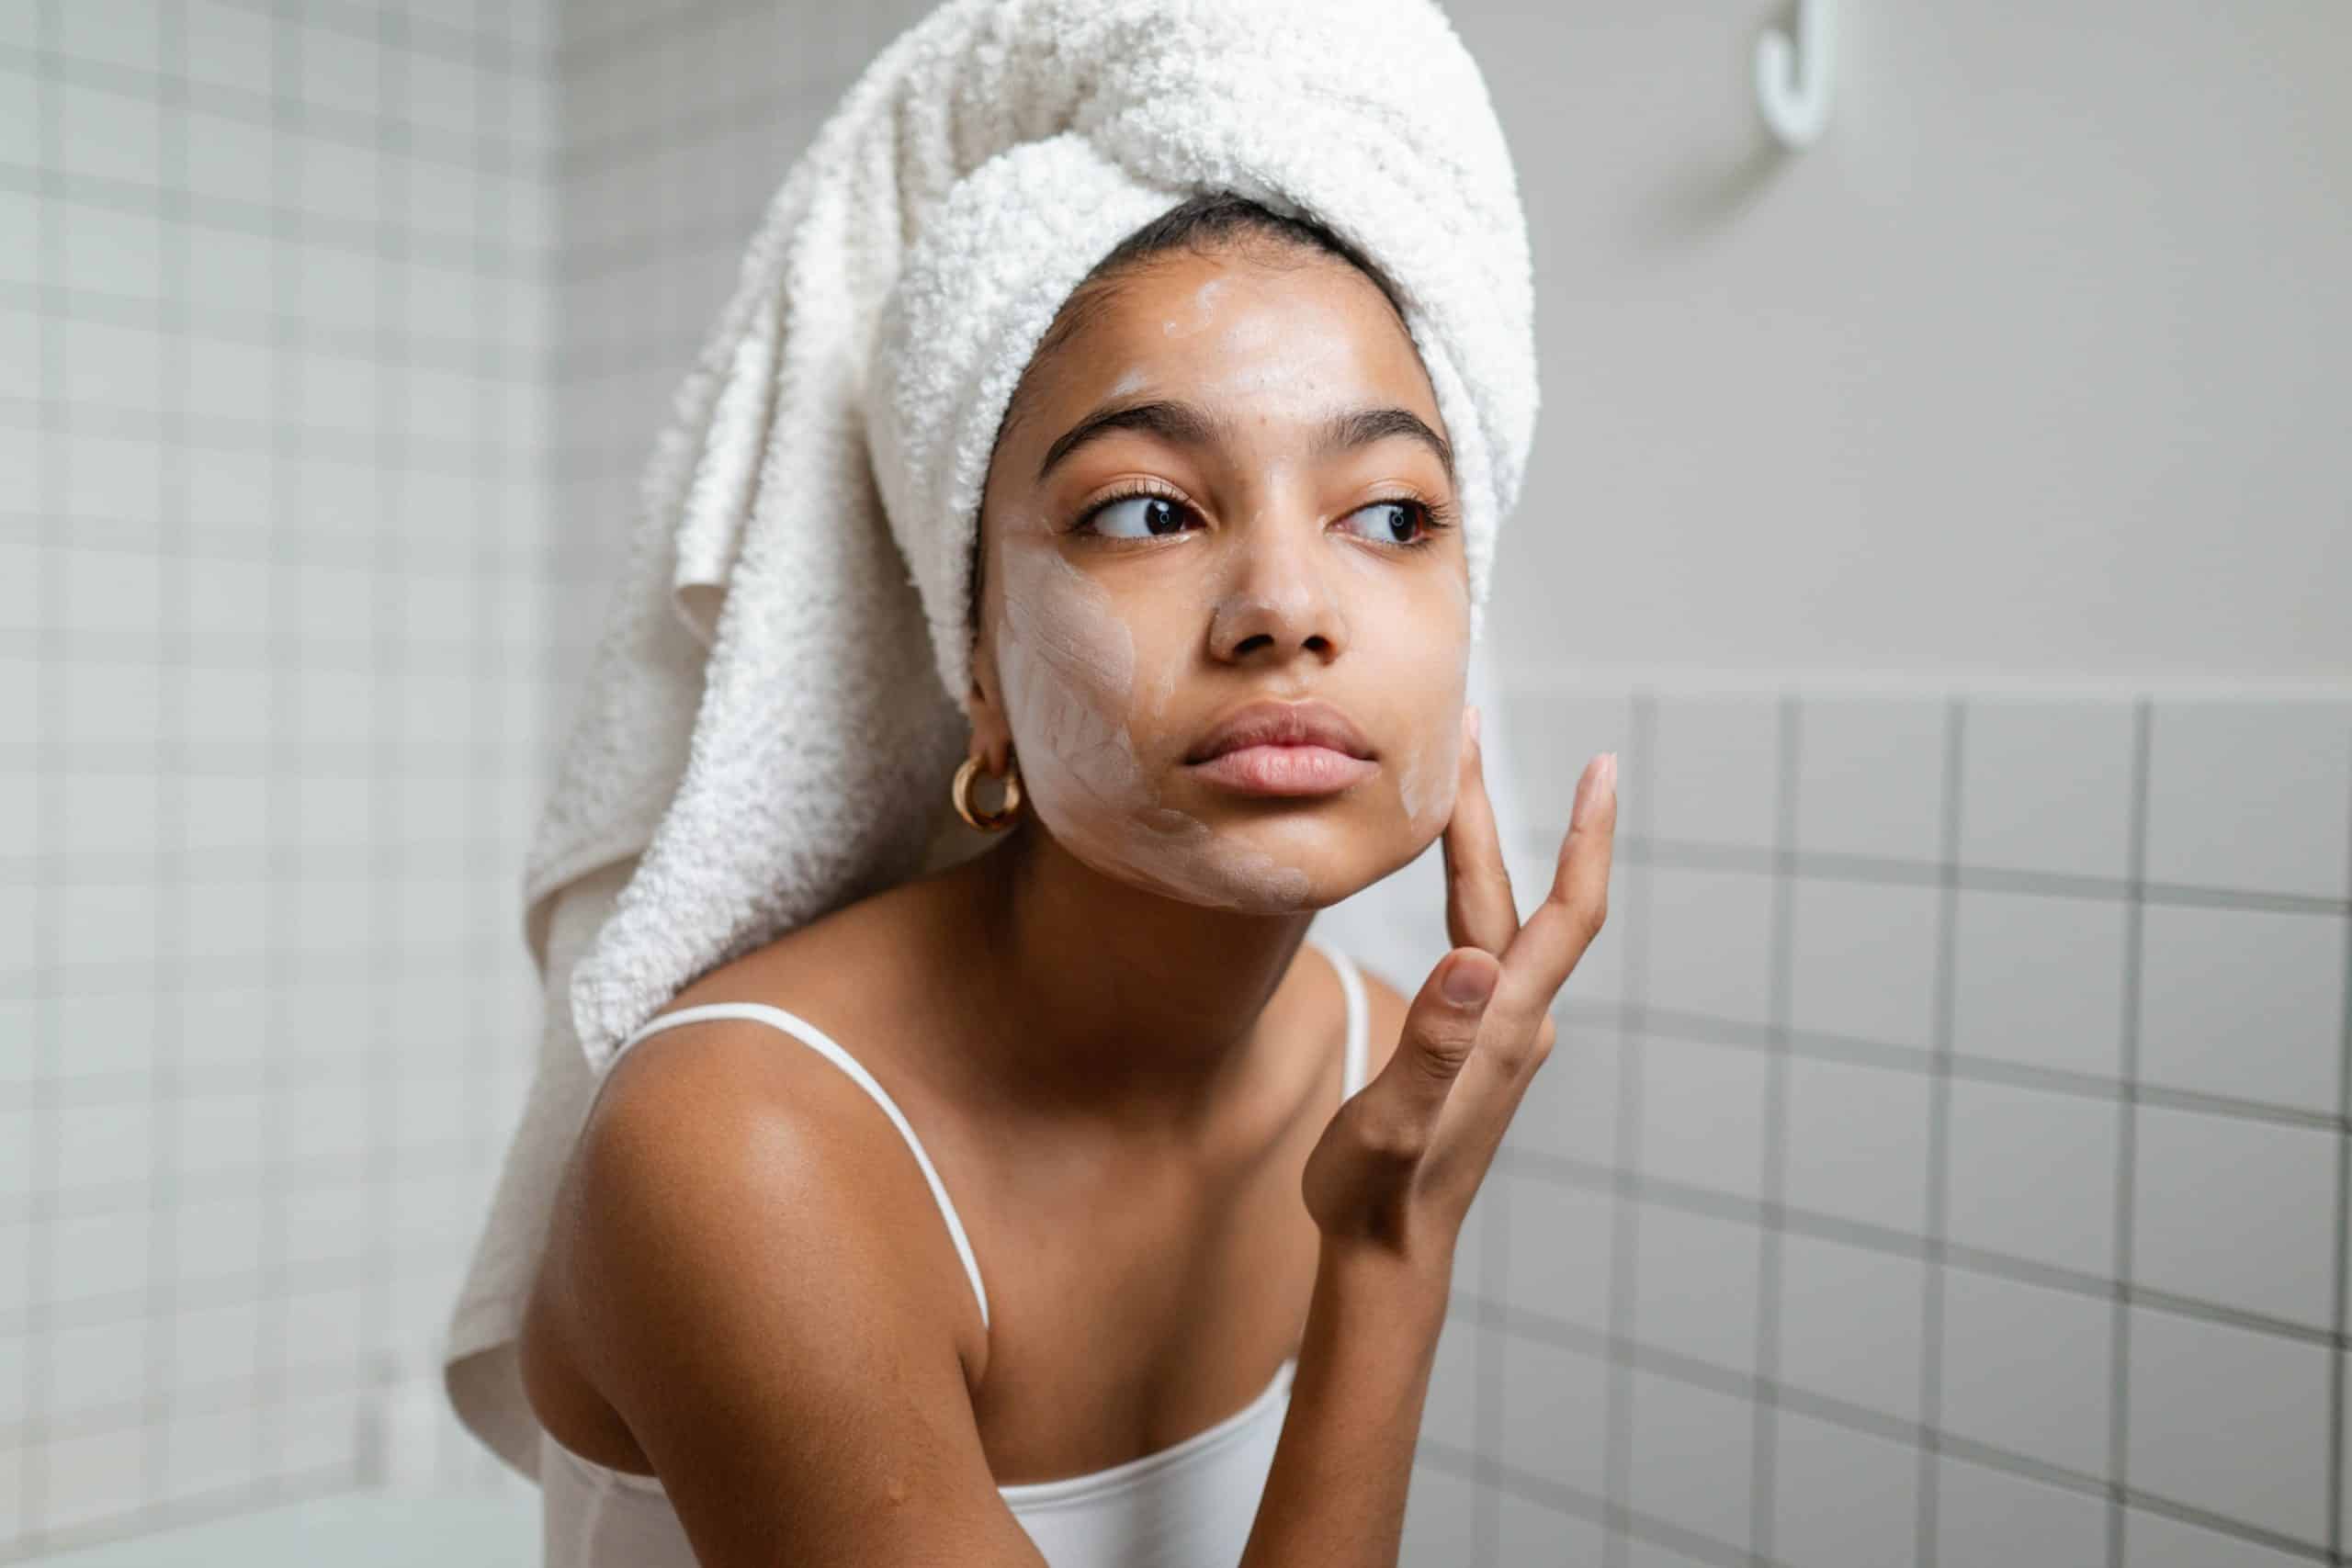 Self-Care: Selfish or Sacred? 12 Eye-Opening Bible Verses About Self-Care